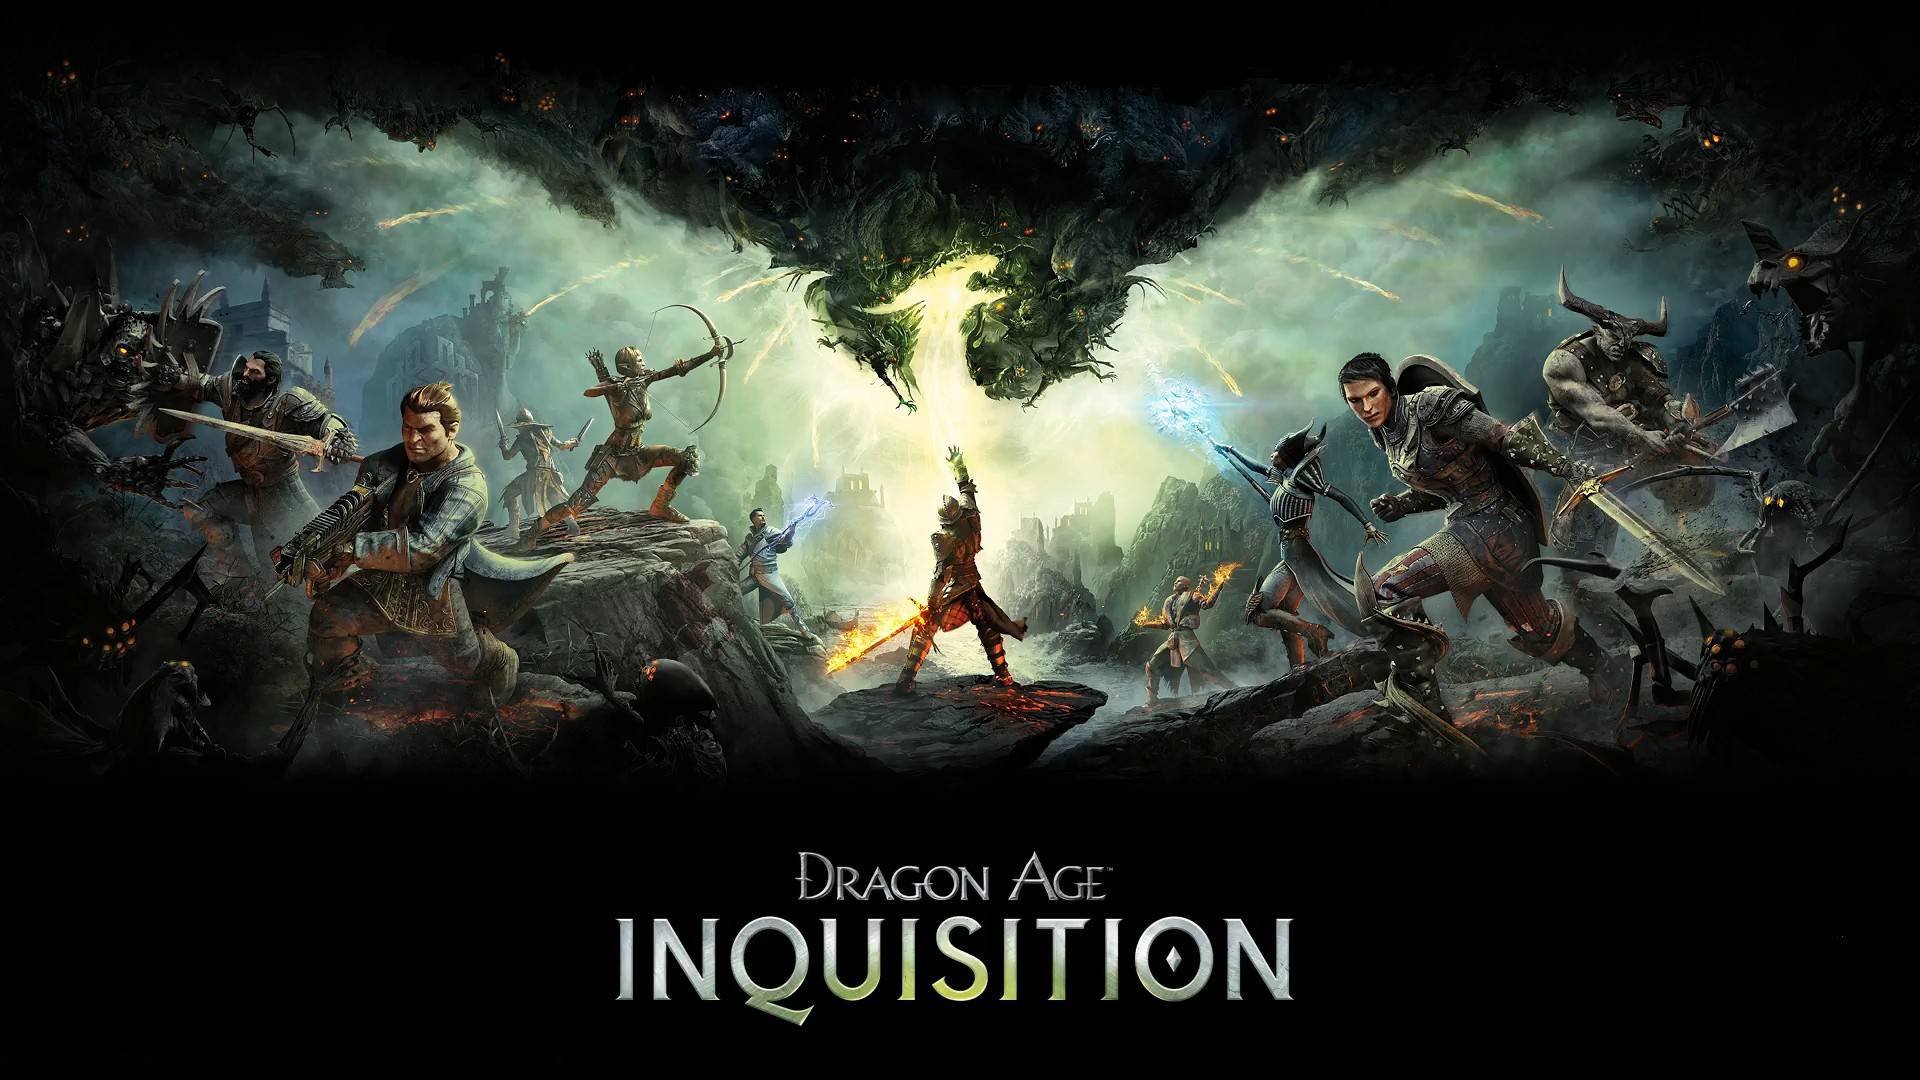 Dragon Age: Inquisition GOTY announced!